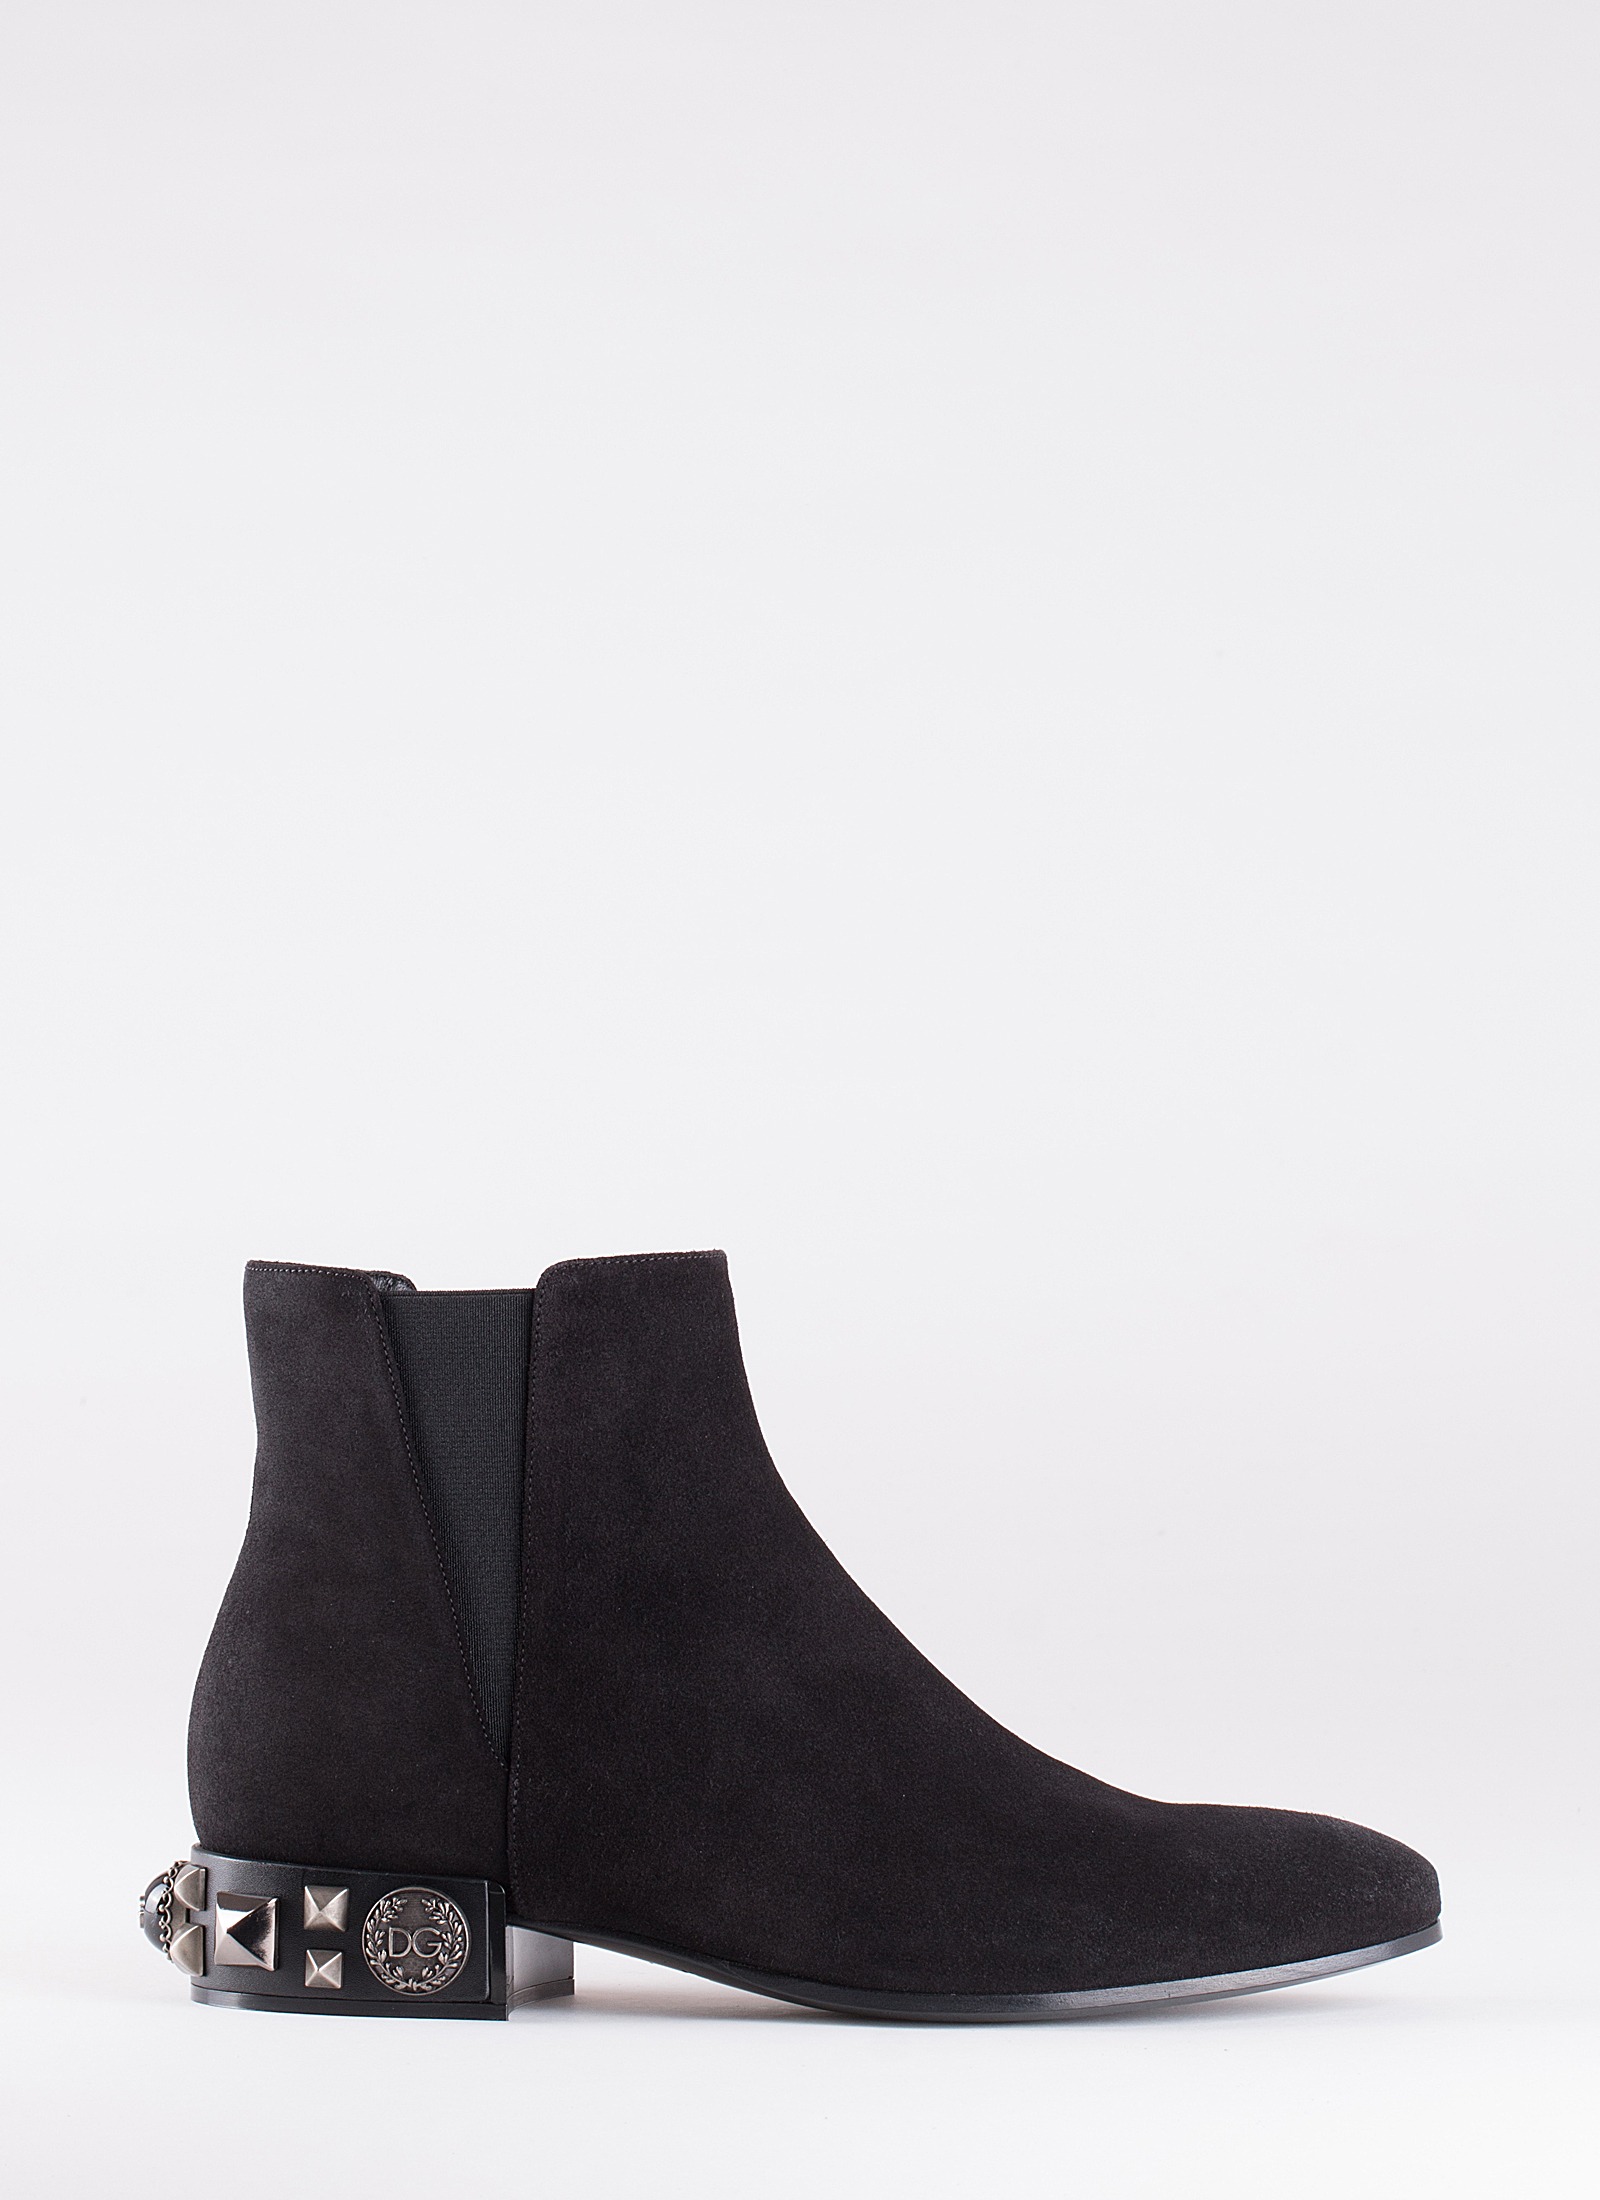 NAPOLI SUEDE CHELSEA BOOTS - DOLCE & GABBANA